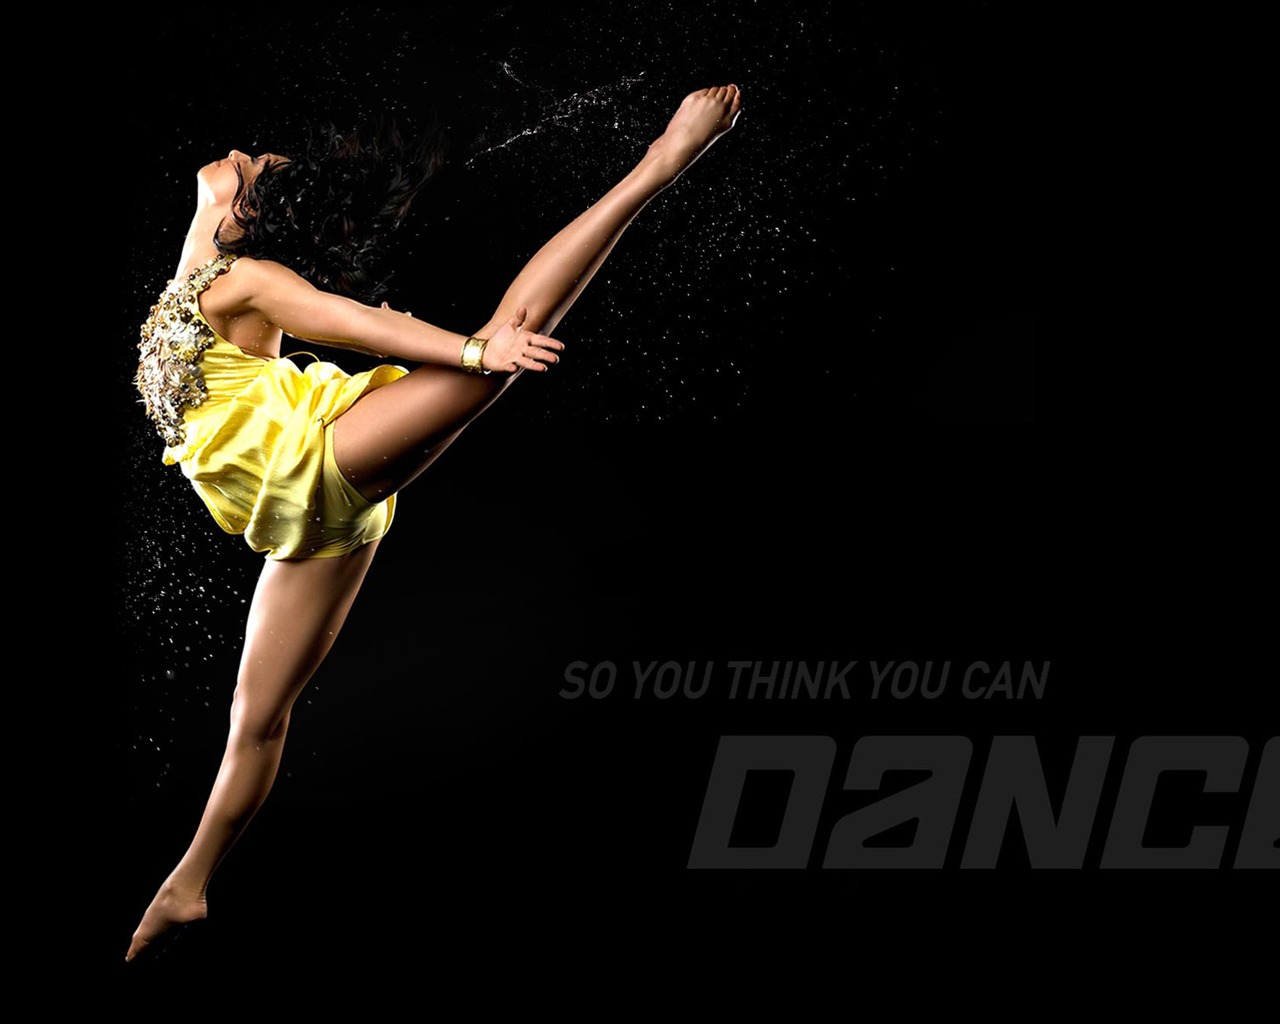 So You Think You Can Dance 舞林争霸 壁纸(一)19 - 1280x1024